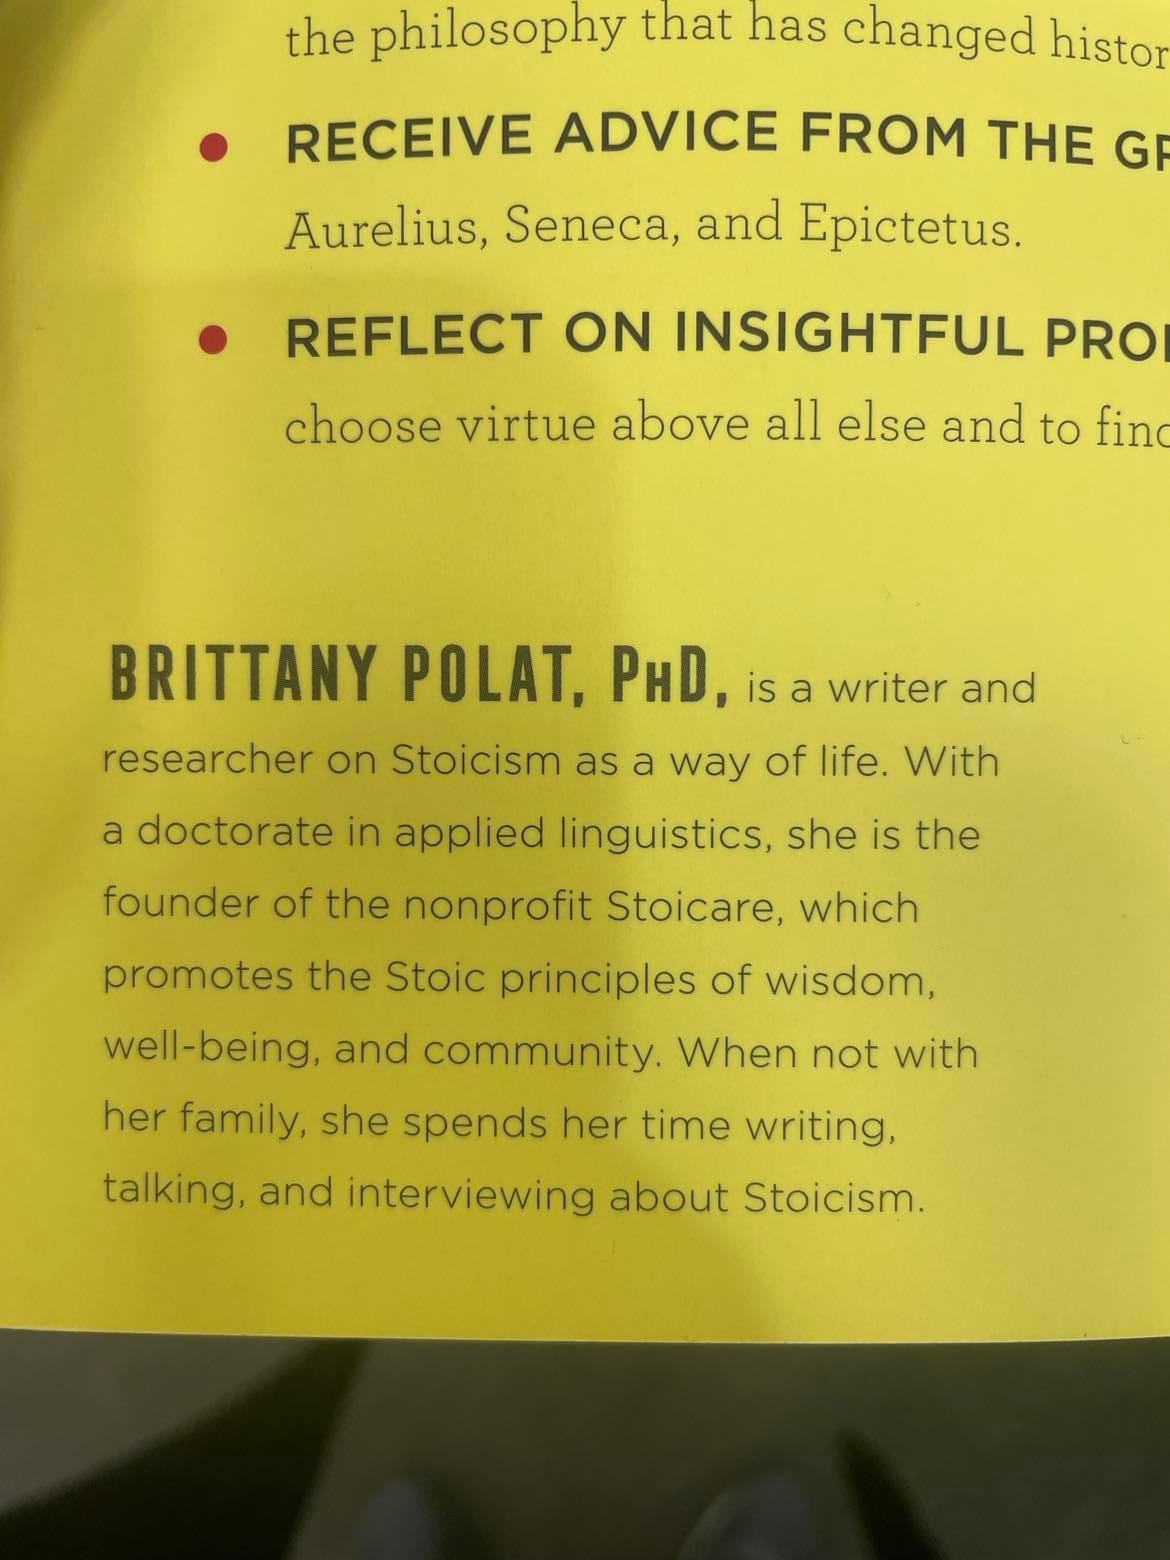 Author bio on a book cover: "Brittany Polat, PhD, is a writer and researcher on Stoicism as a way of life. With a doctorate in applied linguistics, she is the founder of the nonprofit Stoicare, which promotes the Stoic principles of wisdom, well-being, and community. When not with her family, she spends her time writing, talking, and interviewing about Stoicism."